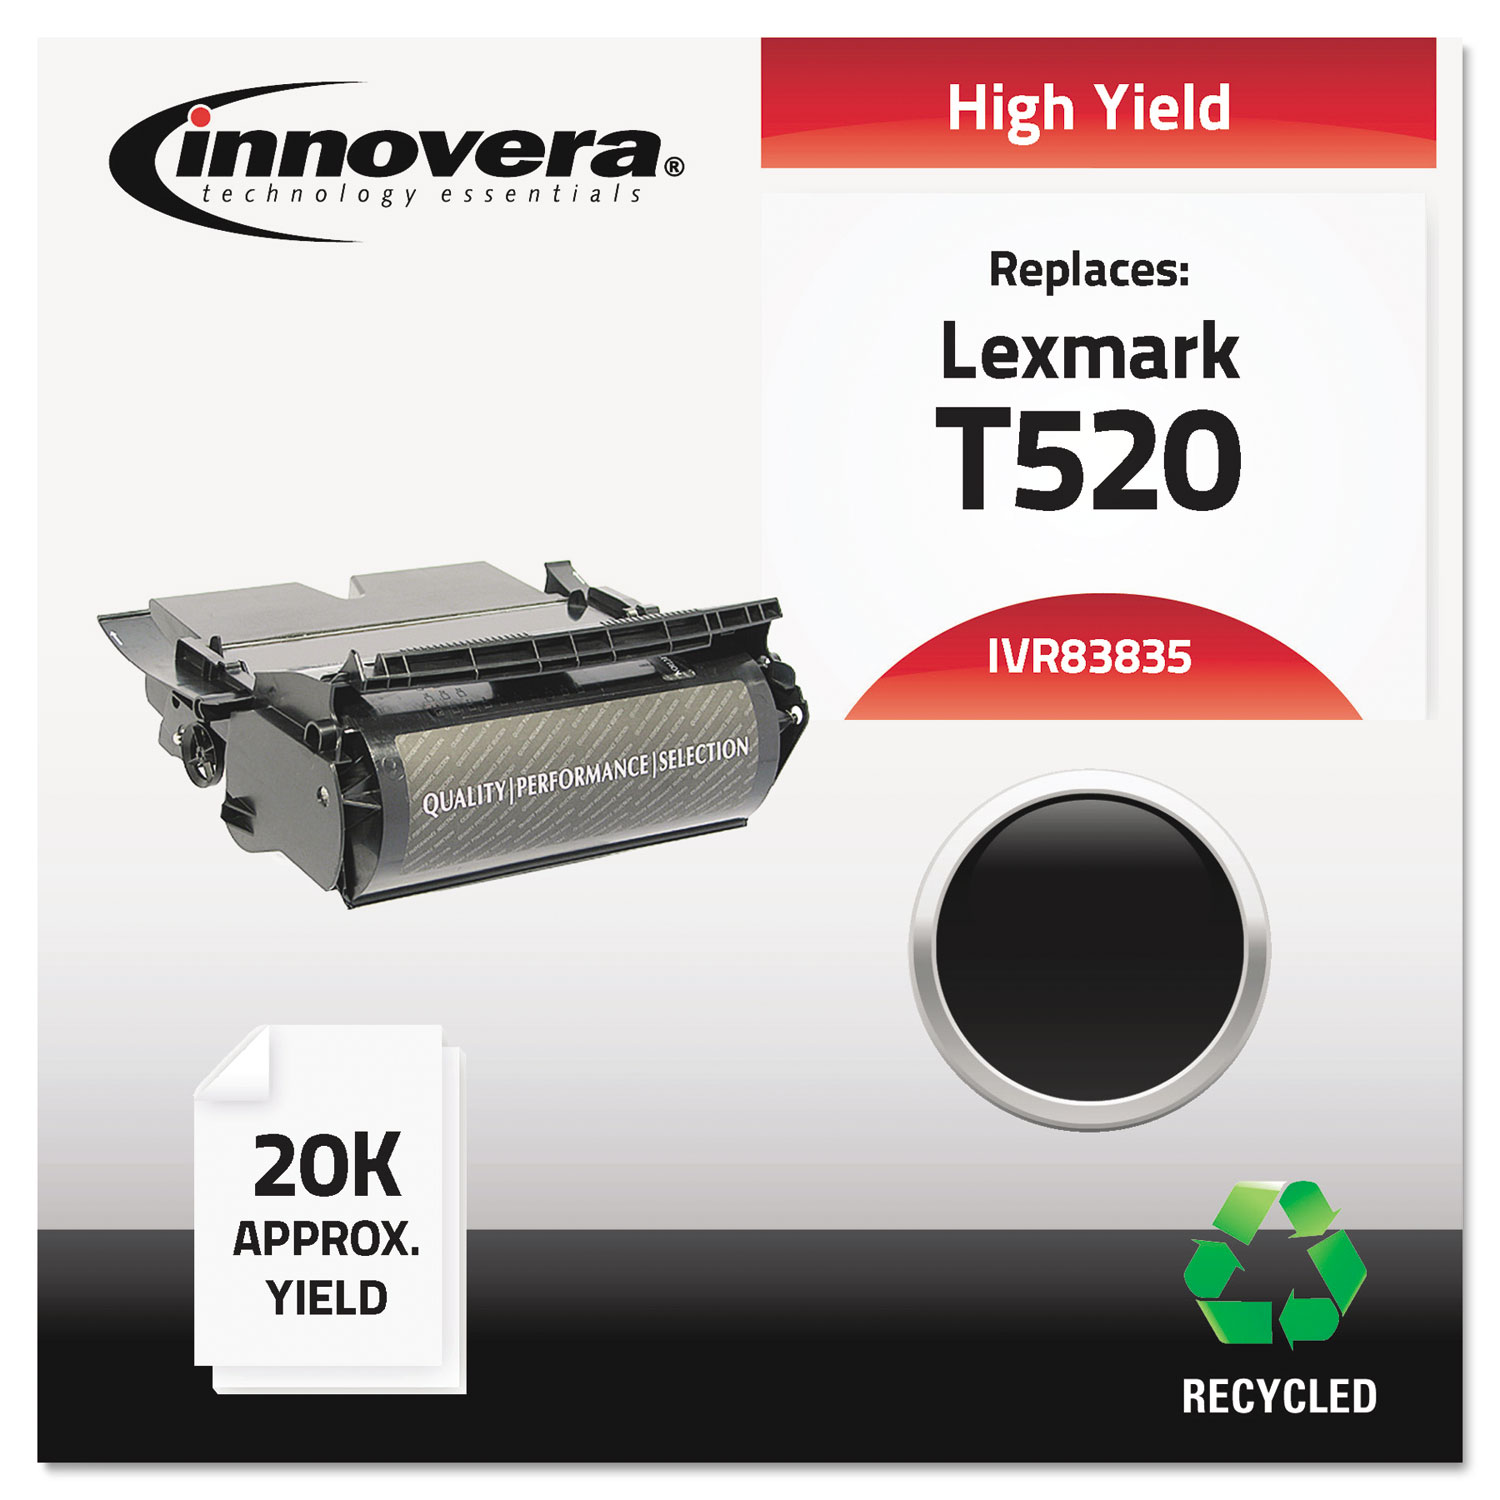 Remanufactured 12A6835 (T520) High-Yield Toner, Black